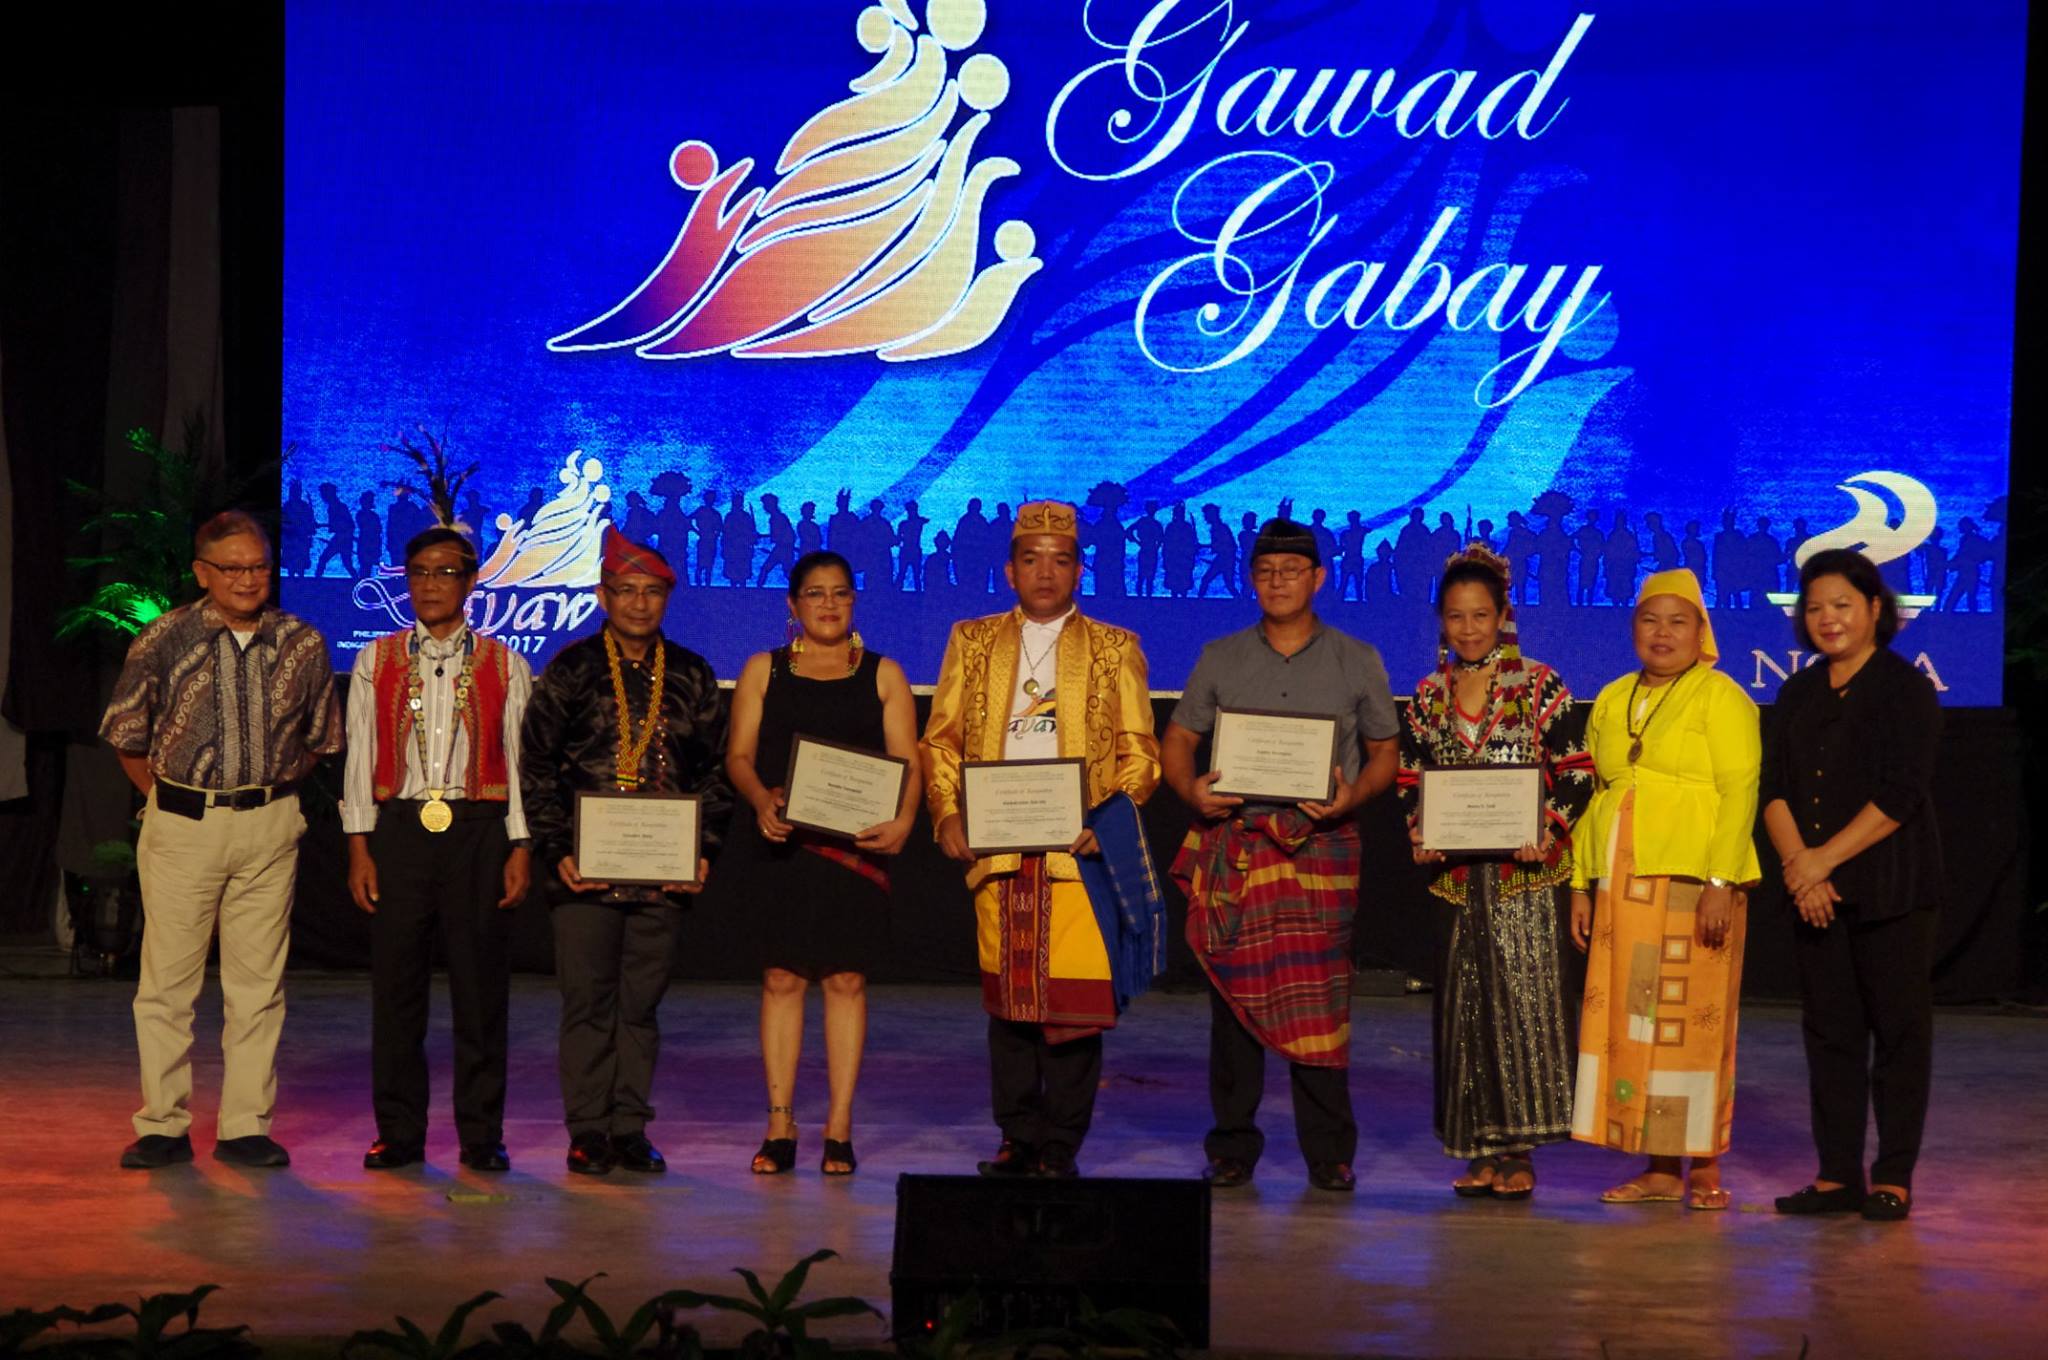  RECOGNITION. Gawad Gabay is an award given to indigenous people who taught and helped spread cultural knowledge and skills to their communities. Photo by Leon Pangilinan, Jr./NCCA

 